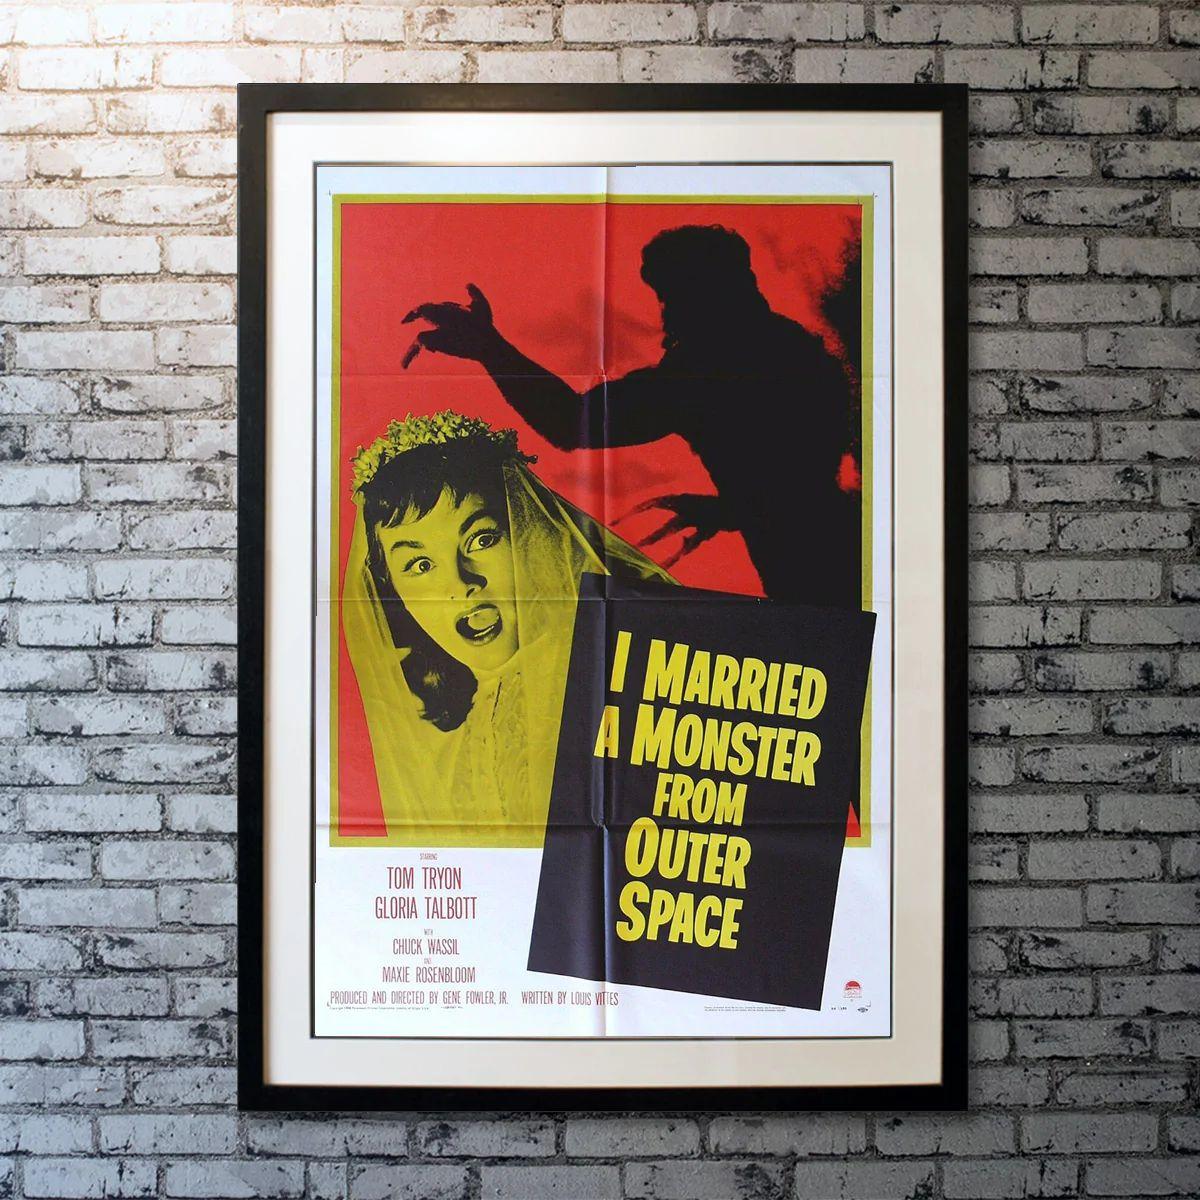 I Married A Monster From Outer Space, unframed poster, 1958.

Original one sheet (27 X 41 inches). Aliens arrive on earth to possess the bodies of humans. One of their first victims is a young man, whose new wife soon realizes something is wrong